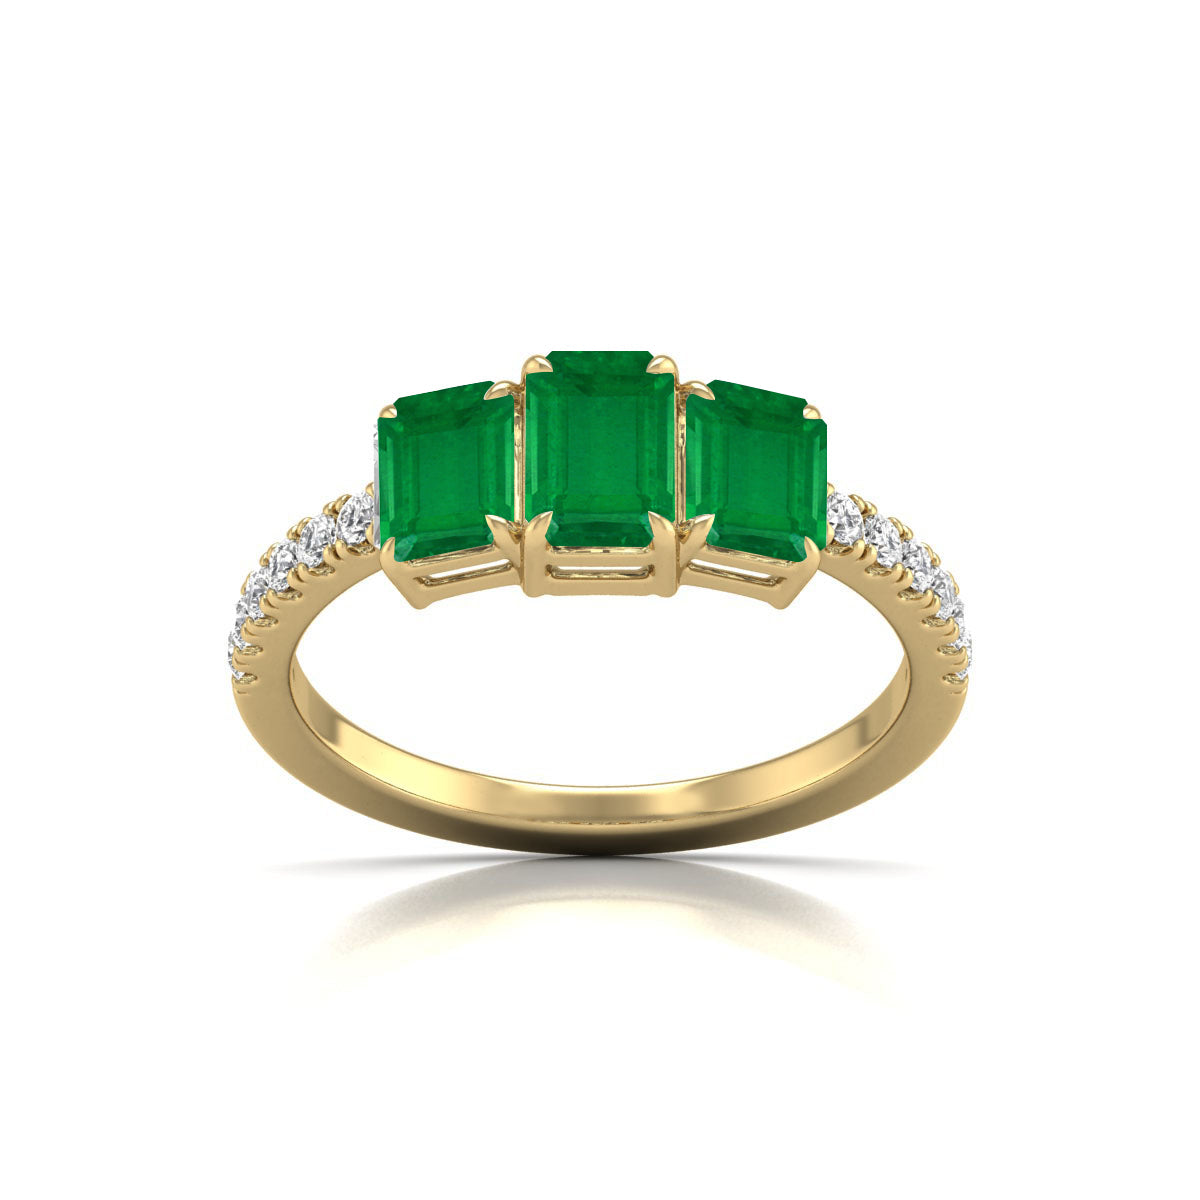 Natural Round Diamond and Emerald Cut Emerald Gemstone Ring in 14K White and Yellow Gold